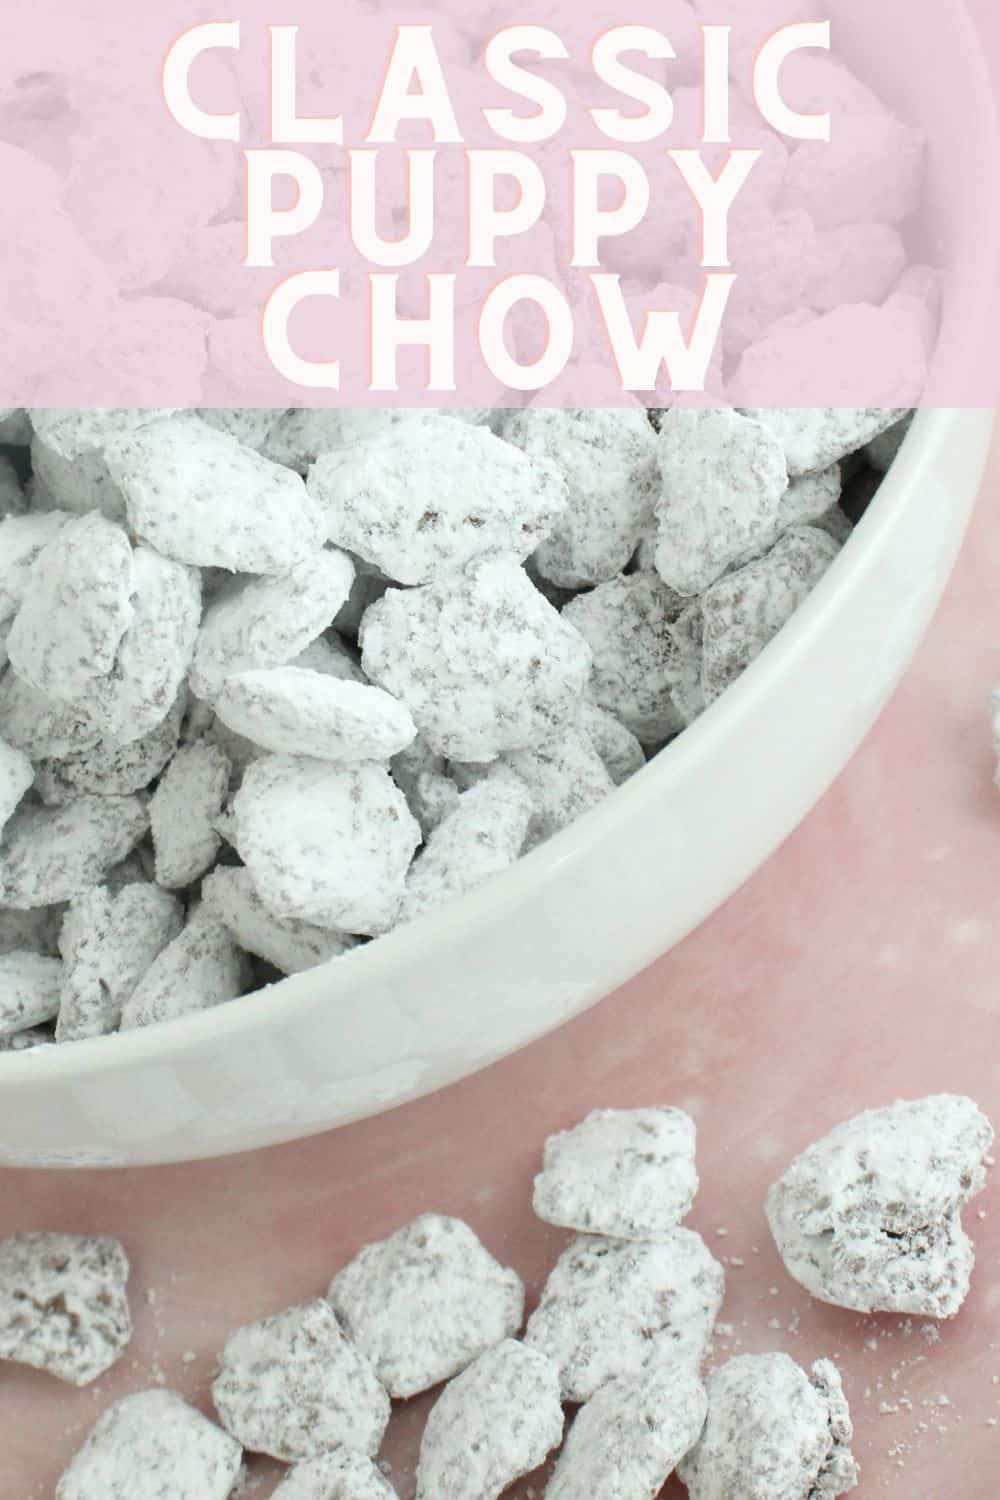 chocolate snack mix in a white bowl with pink background